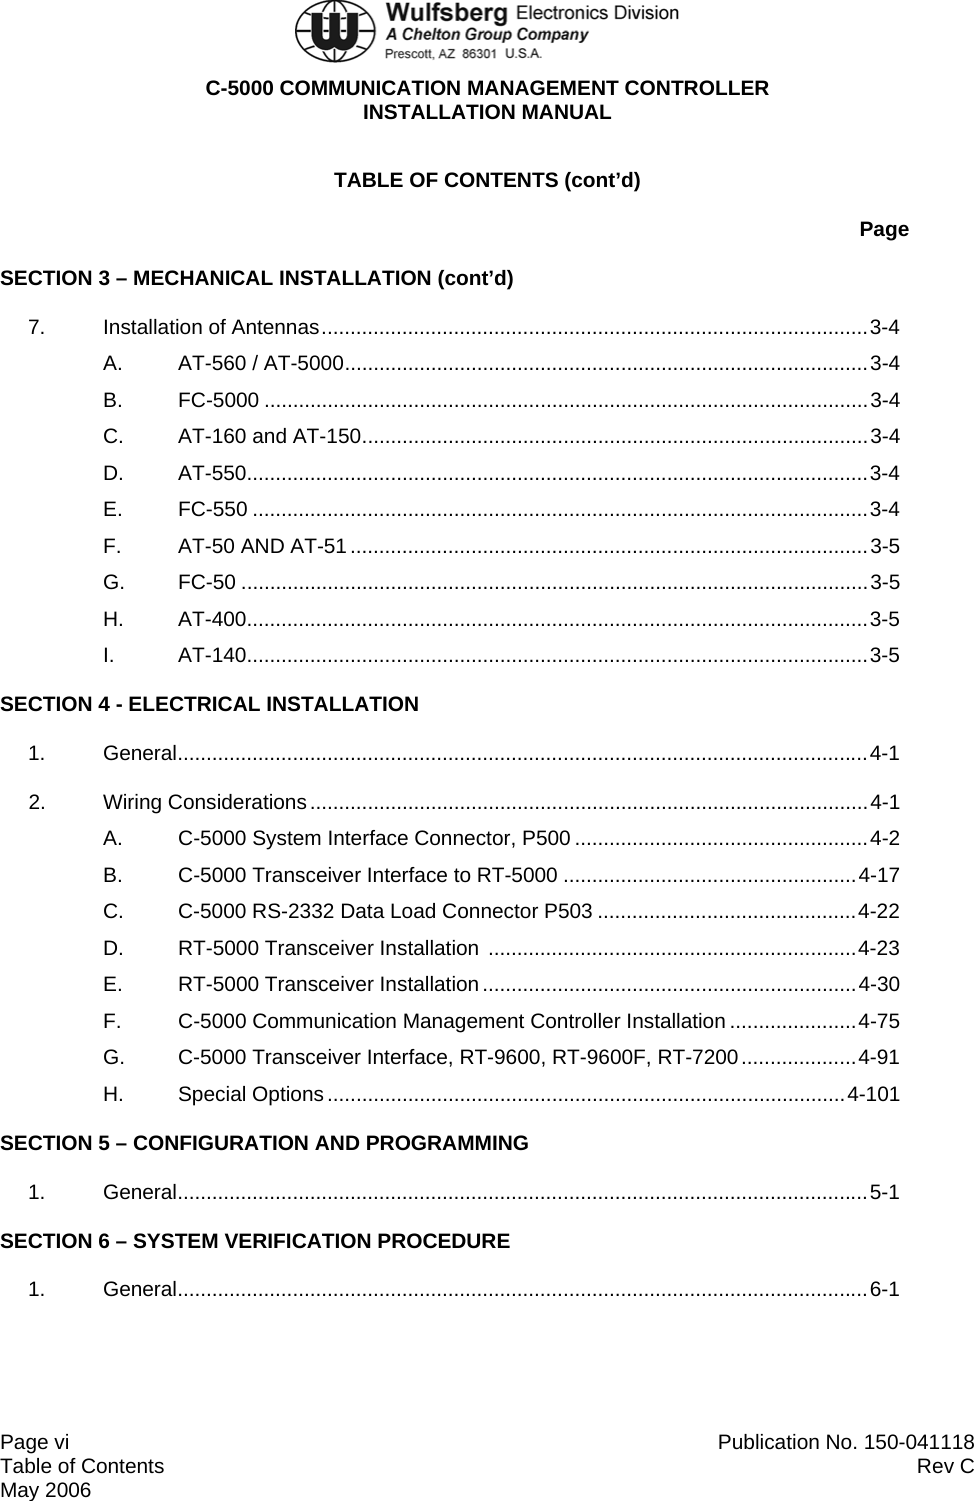  C-5000 COMMUNICATION MANAGEMENT CONTROLLER INSTALLATION MANUAL  Page vi  Publication No. 150-041118 Table of Contents  Rev C  May 2006 TABLE OF CONTENTS (cont’d) Page SECTION 3 – MECHANICAL INSTALLATION (cont’d) 7. Installation of Antennas...............................................................................................3-4 A. AT-560 / AT-5000...........................................................................................3-4 B. FC-5000 .........................................................................................................3-4 C. AT-160 and AT-150........................................................................................3-4 D. AT-550............................................................................................................3-4 E. FC-550 ...........................................................................................................3-4 F. AT-50 AND AT-51..........................................................................................3-5 G. FC-50 .............................................................................................................3-5 H. AT-400............................................................................................................3-5 I. AT-140............................................................................................................3-5 SECTION 4 - ELECTRICAL INSTALLATION 1. General........................................................................................................................4-1 2. Wiring Considerations .................................................................................................4-1 A.  C-5000 System Interface Connector, P500 ...................................................4-2 B.  C-5000 Transceiver Interface to RT-5000 ...................................................4-17 C.  C-5000 RS-2332 Data Load Connector P503 .............................................4-22 D. RT-5000 Transceiver Installation ................................................................4-23 E. RT-5000 Transceiver Installation .................................................................4-30 F. C-5000 Communication Management Controller Installation ......................4-75 G.  C-5000 Transceiver Interface, RT-9600, RT-9600F, RT-7200....................4-91 H. Special Options ..........................................................................................4-101 SECTION 5 – CONFIGURATION AND PROGRAMMING 1. General........................................................................................................................5-1 SECTION 6 – SYSTEM VERIFICATION PROCEDURE 1. General........................................................................................................................6-1 